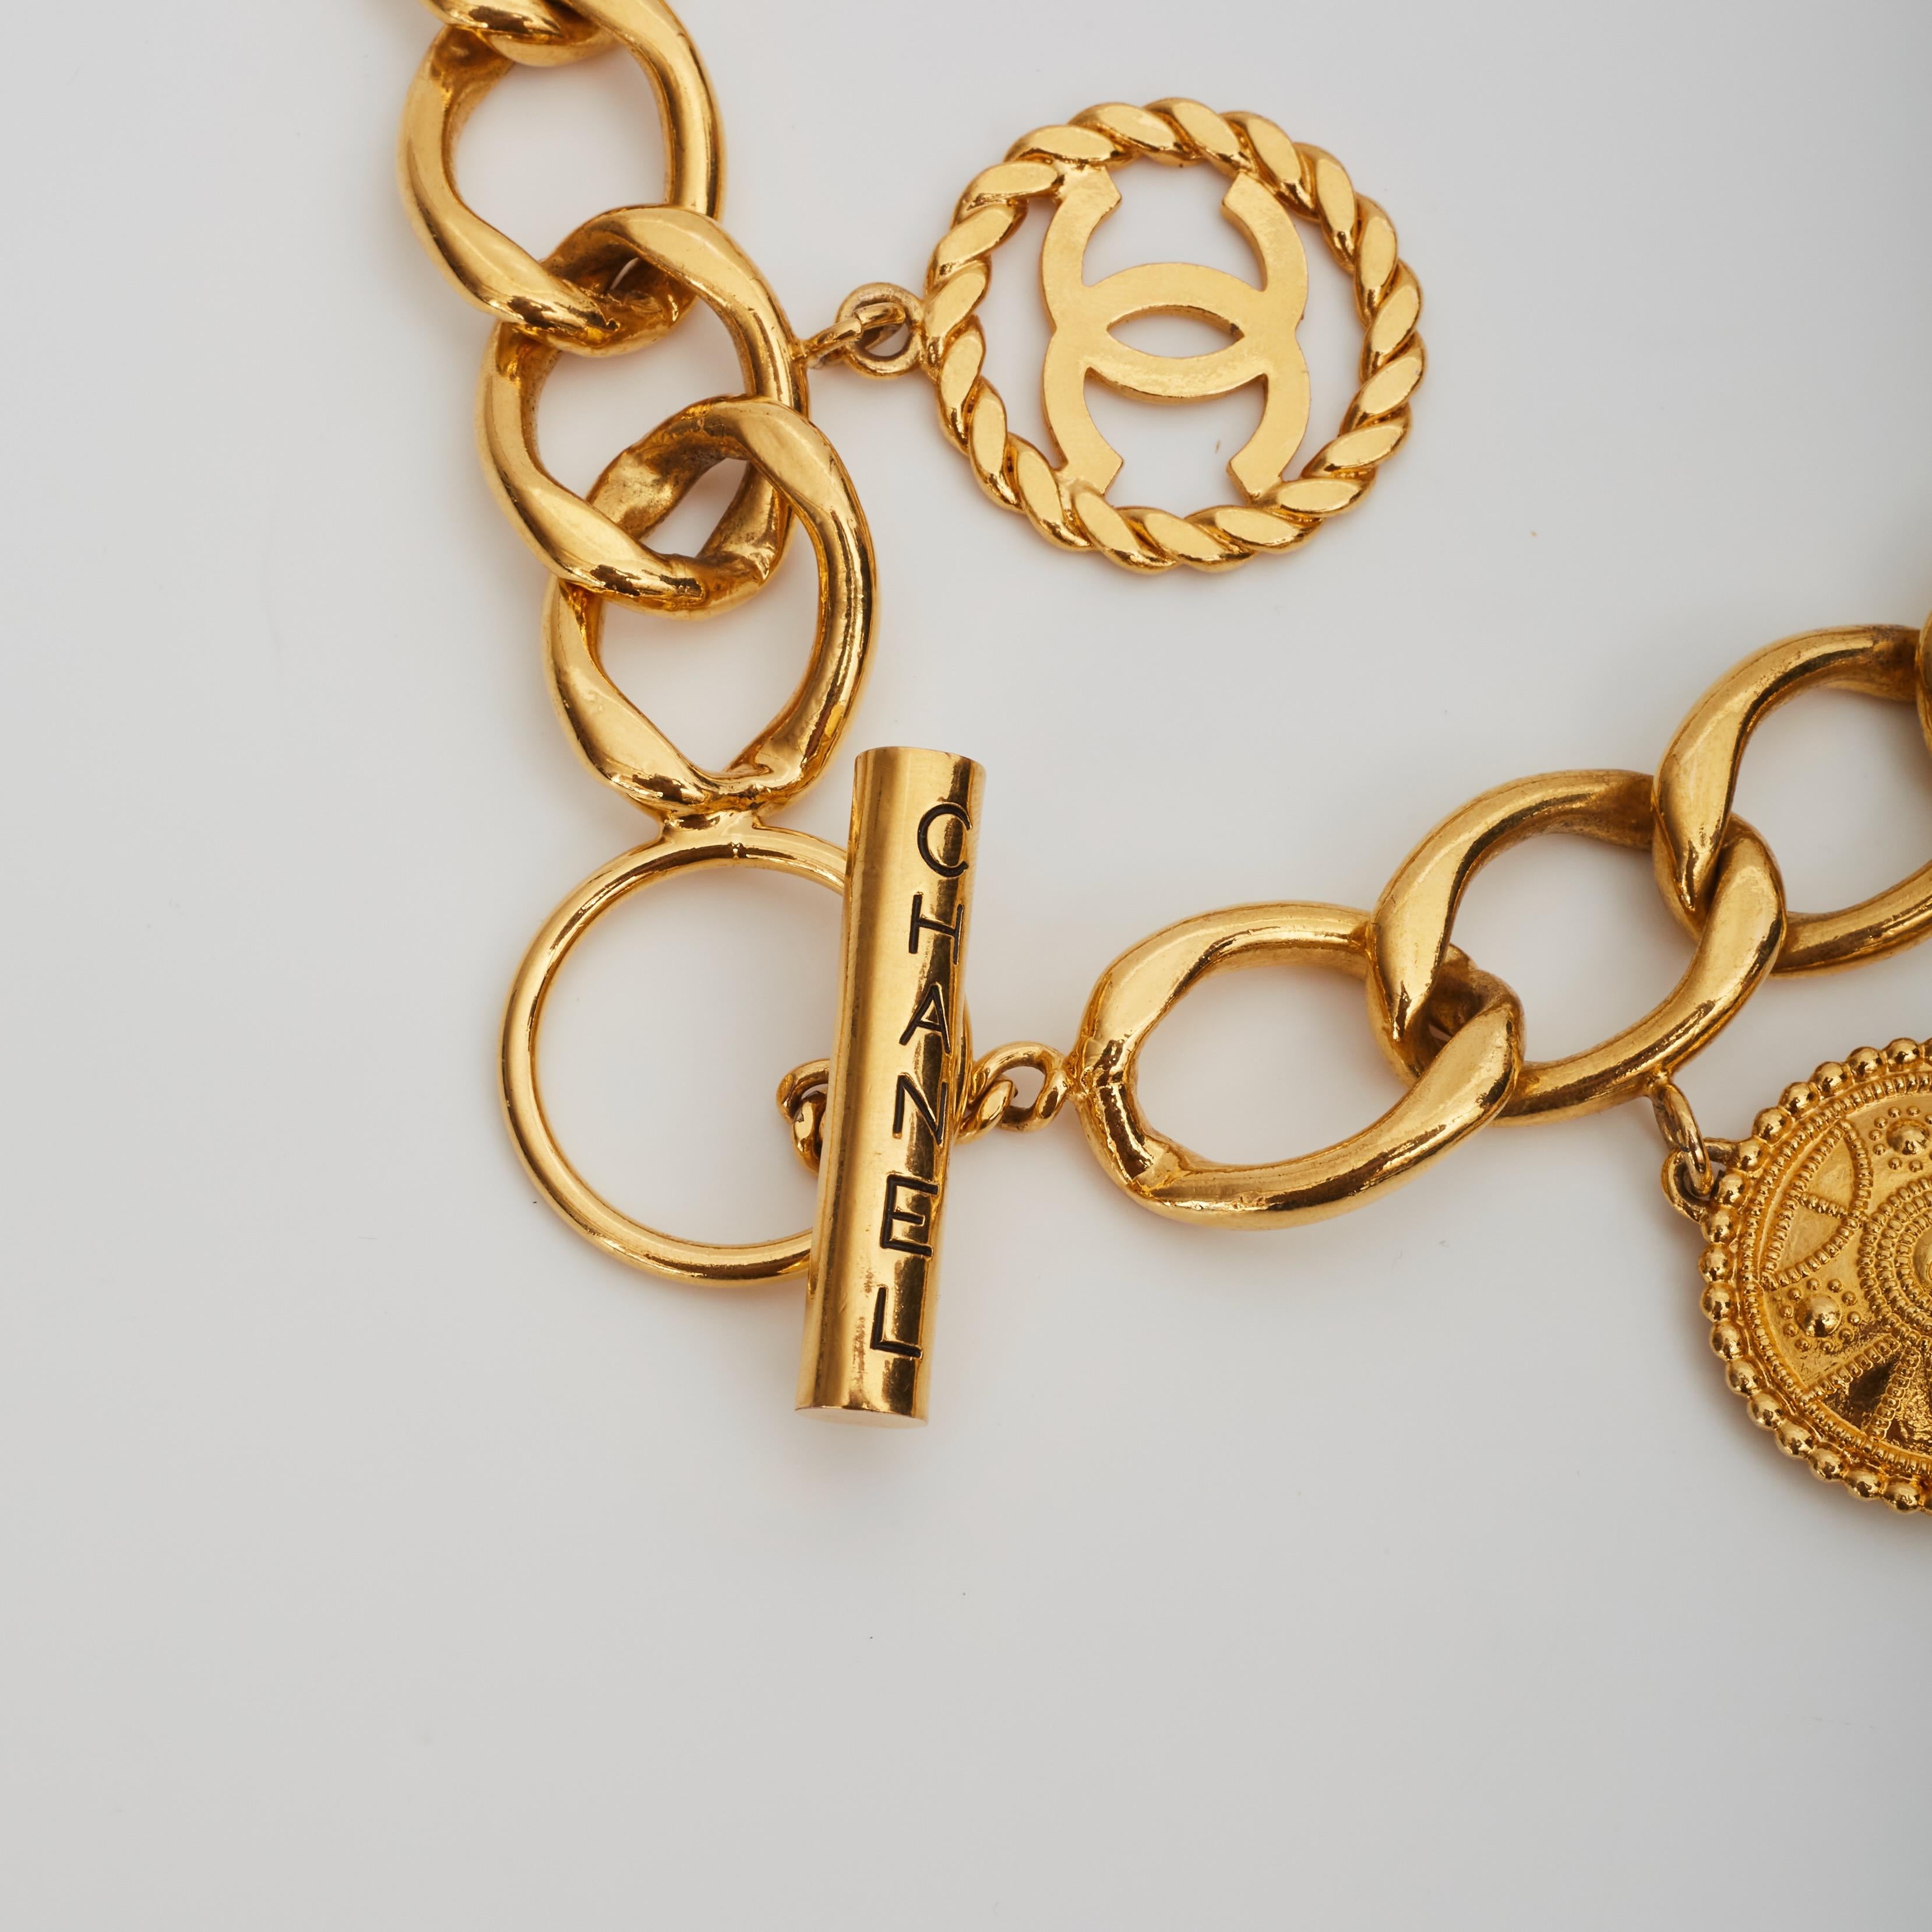 Chanel Logo Coin Medallion Charm Gold Chain Necklace Belt (1993) 26inch 12